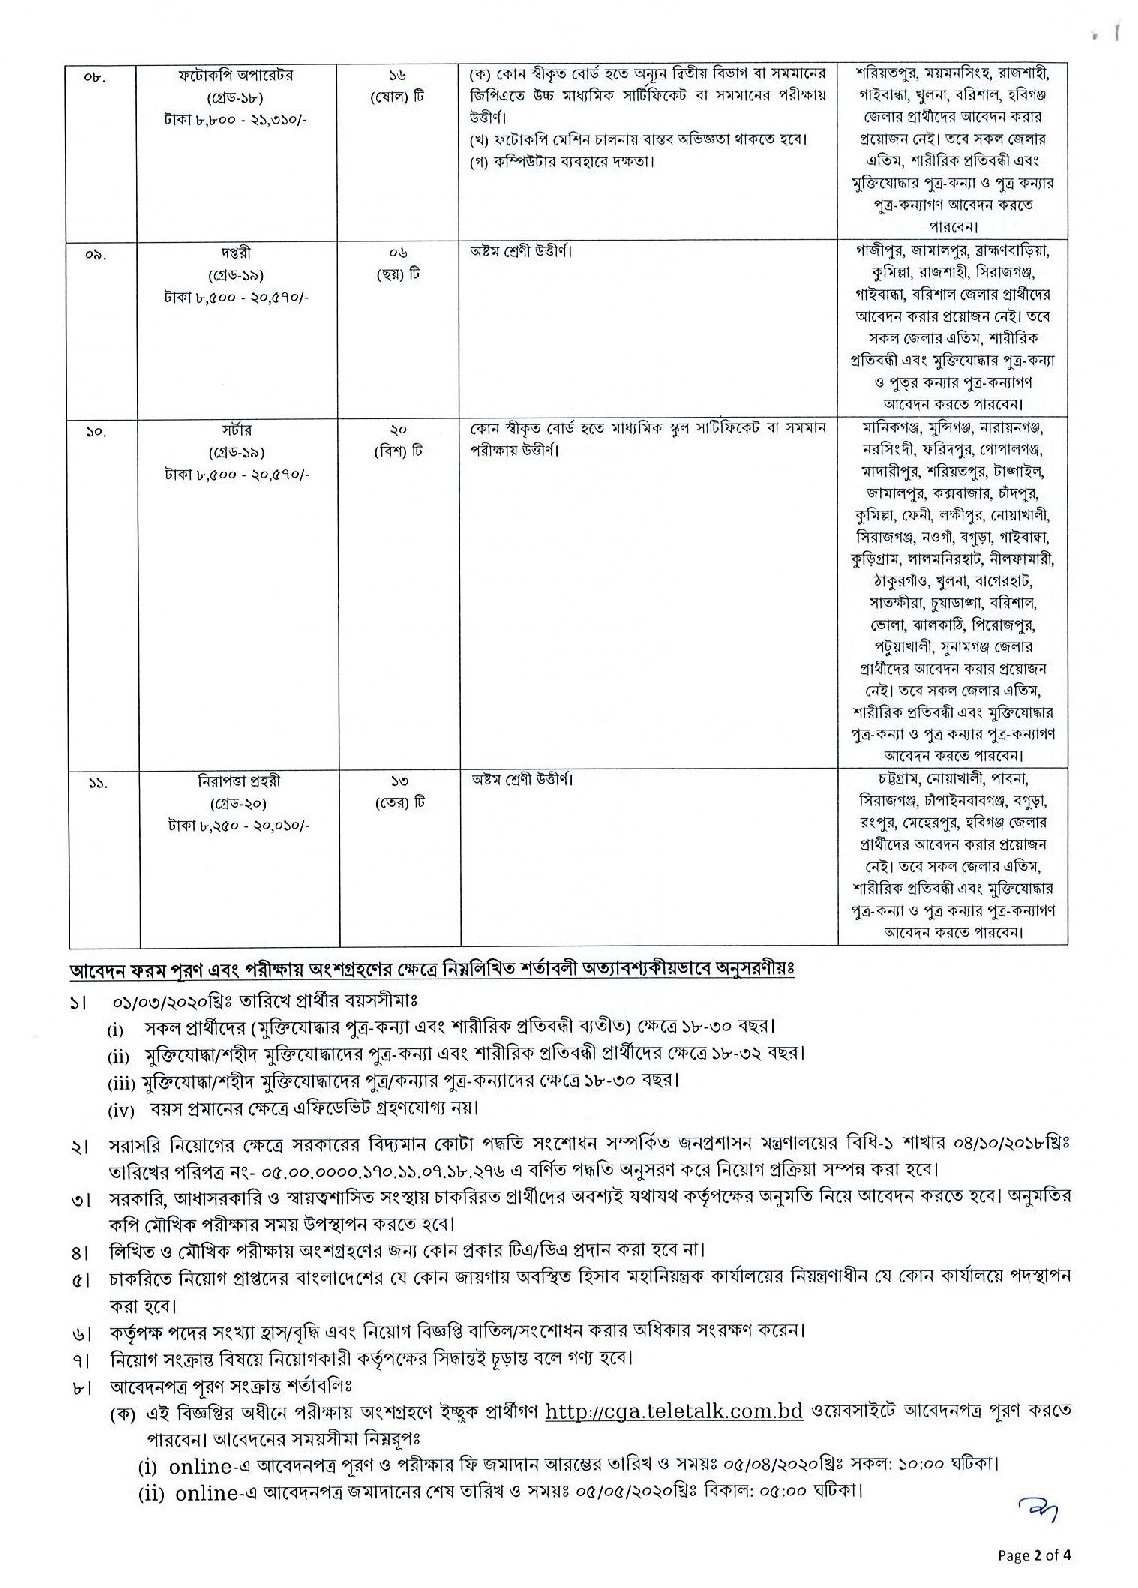 Office of the Controller General of Accounts Job Circular 2020-1